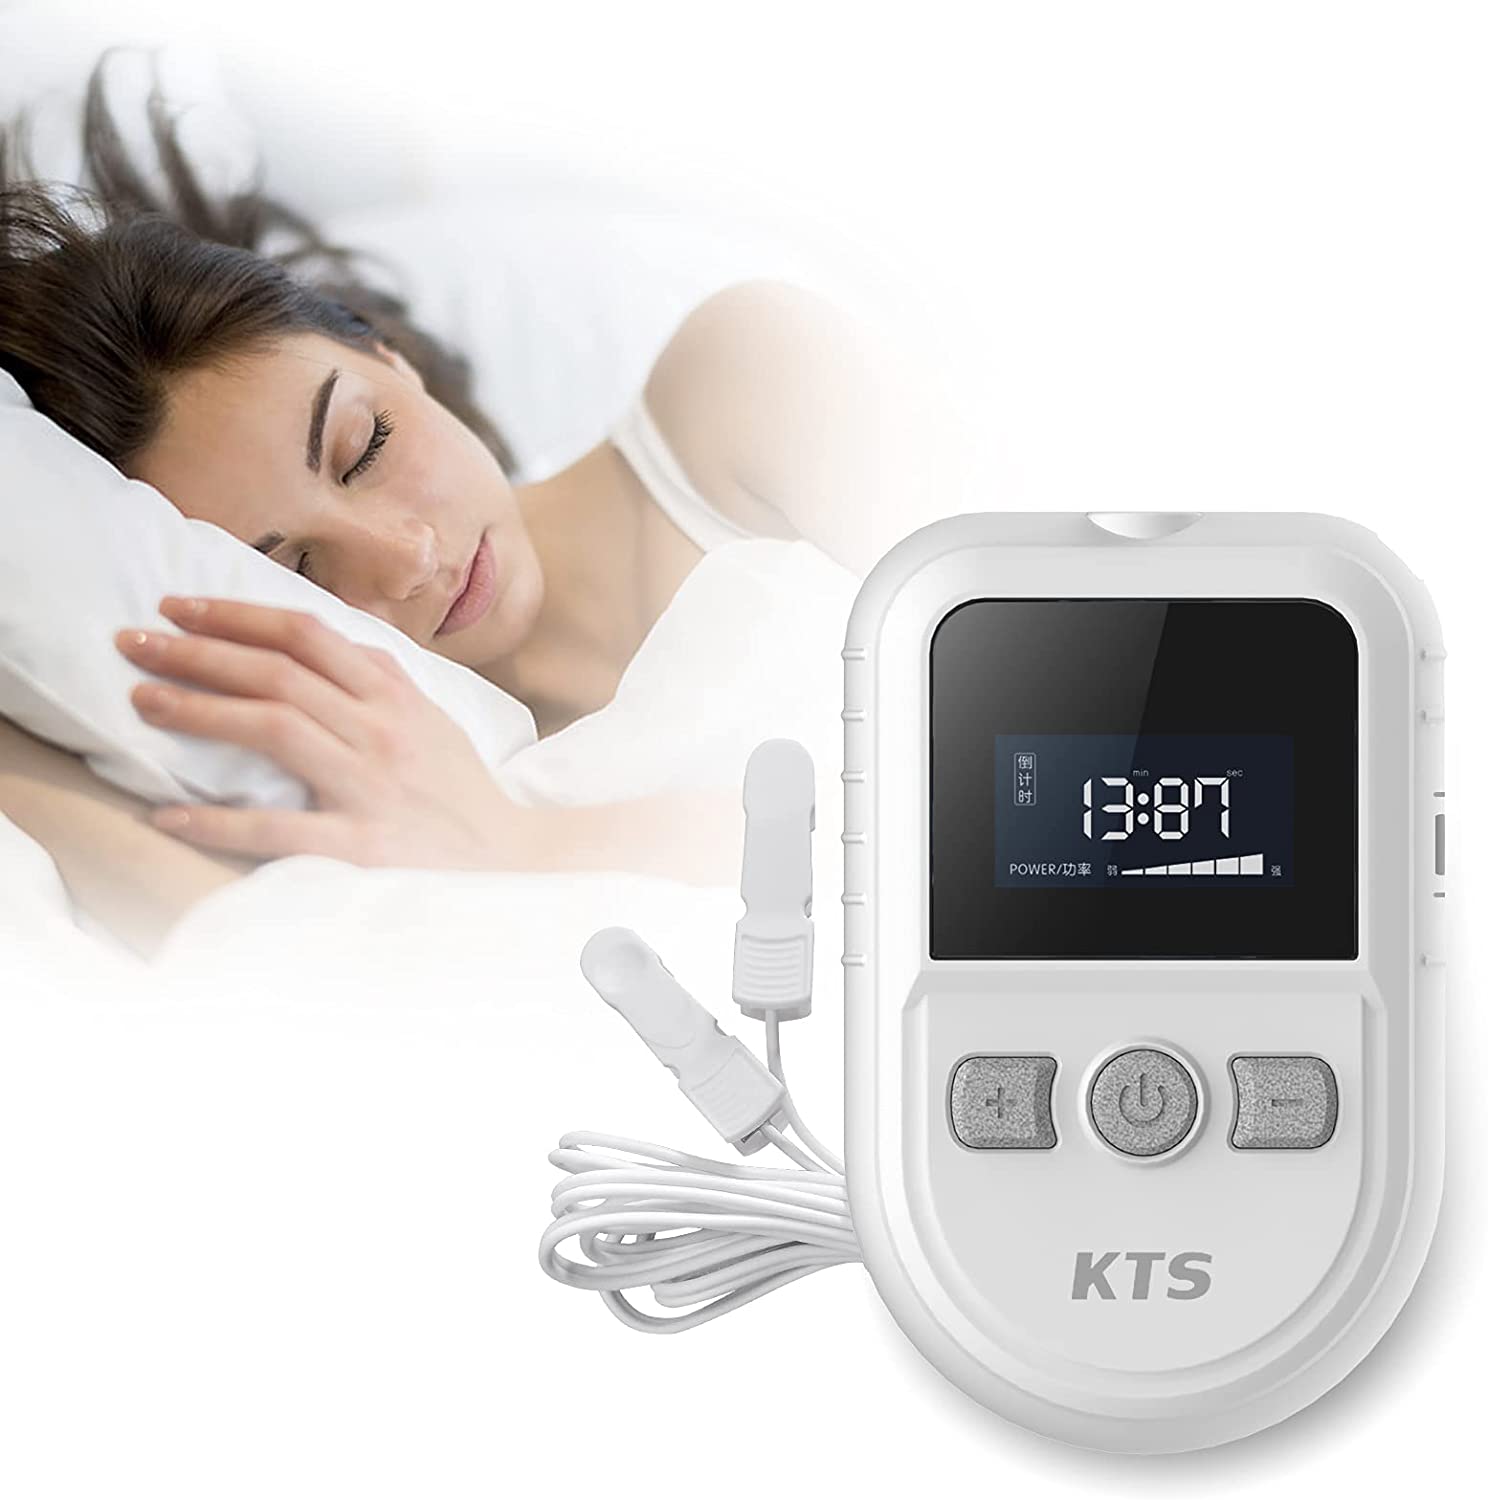 KTS CES Sleep Aid Device Tens Machine for Insomnia Anxiety and Depression with Transcranial Microcurrent